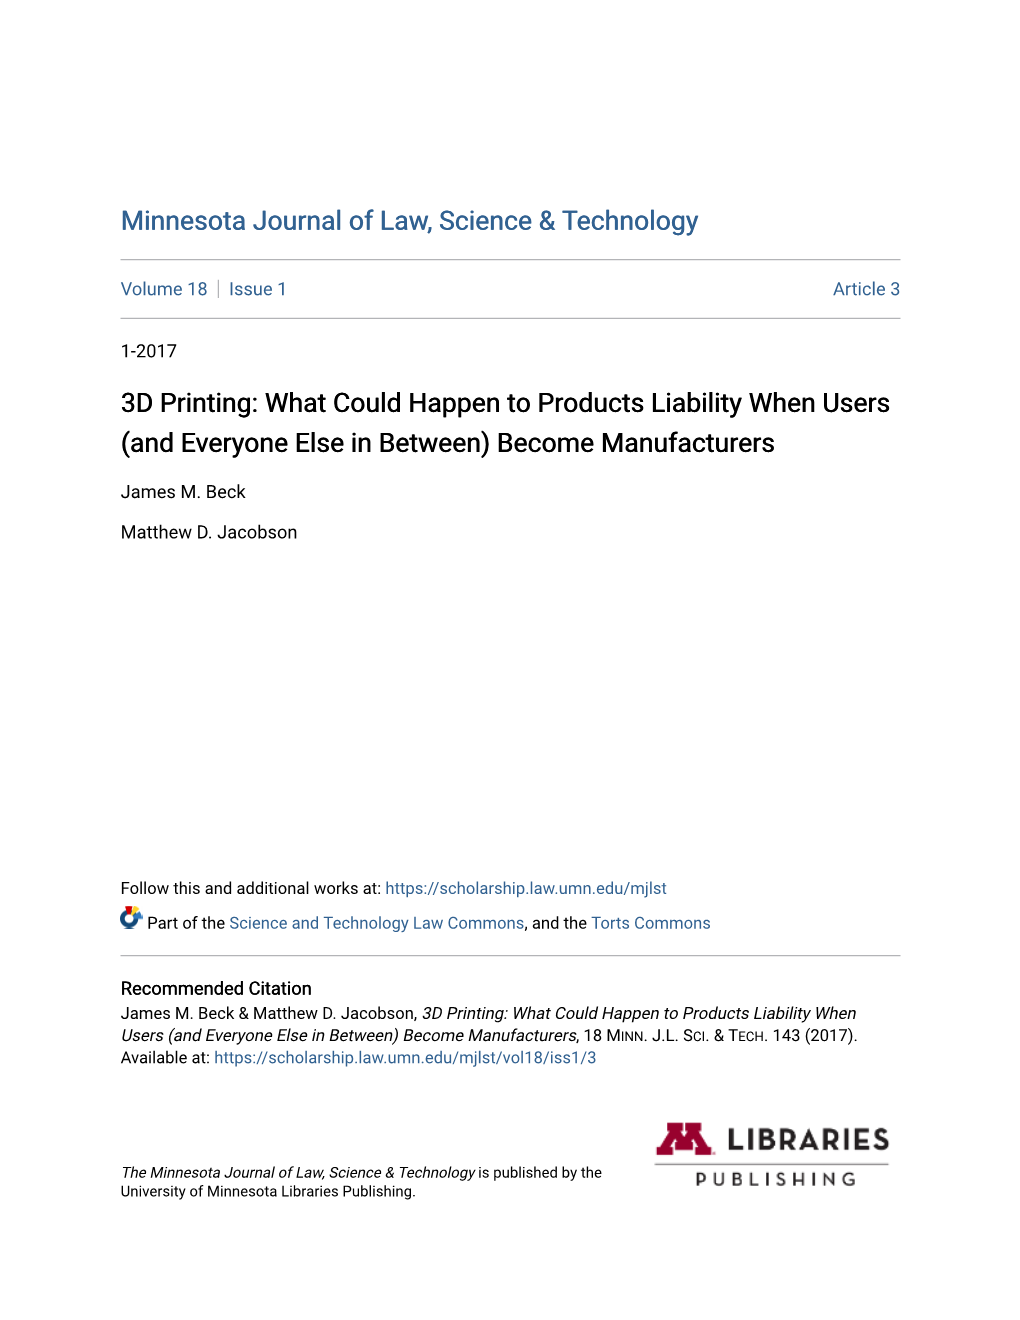 3D Printing: What Could Happen to Products Liability When Users (And Everyone Else in Between) Become Manufacturers